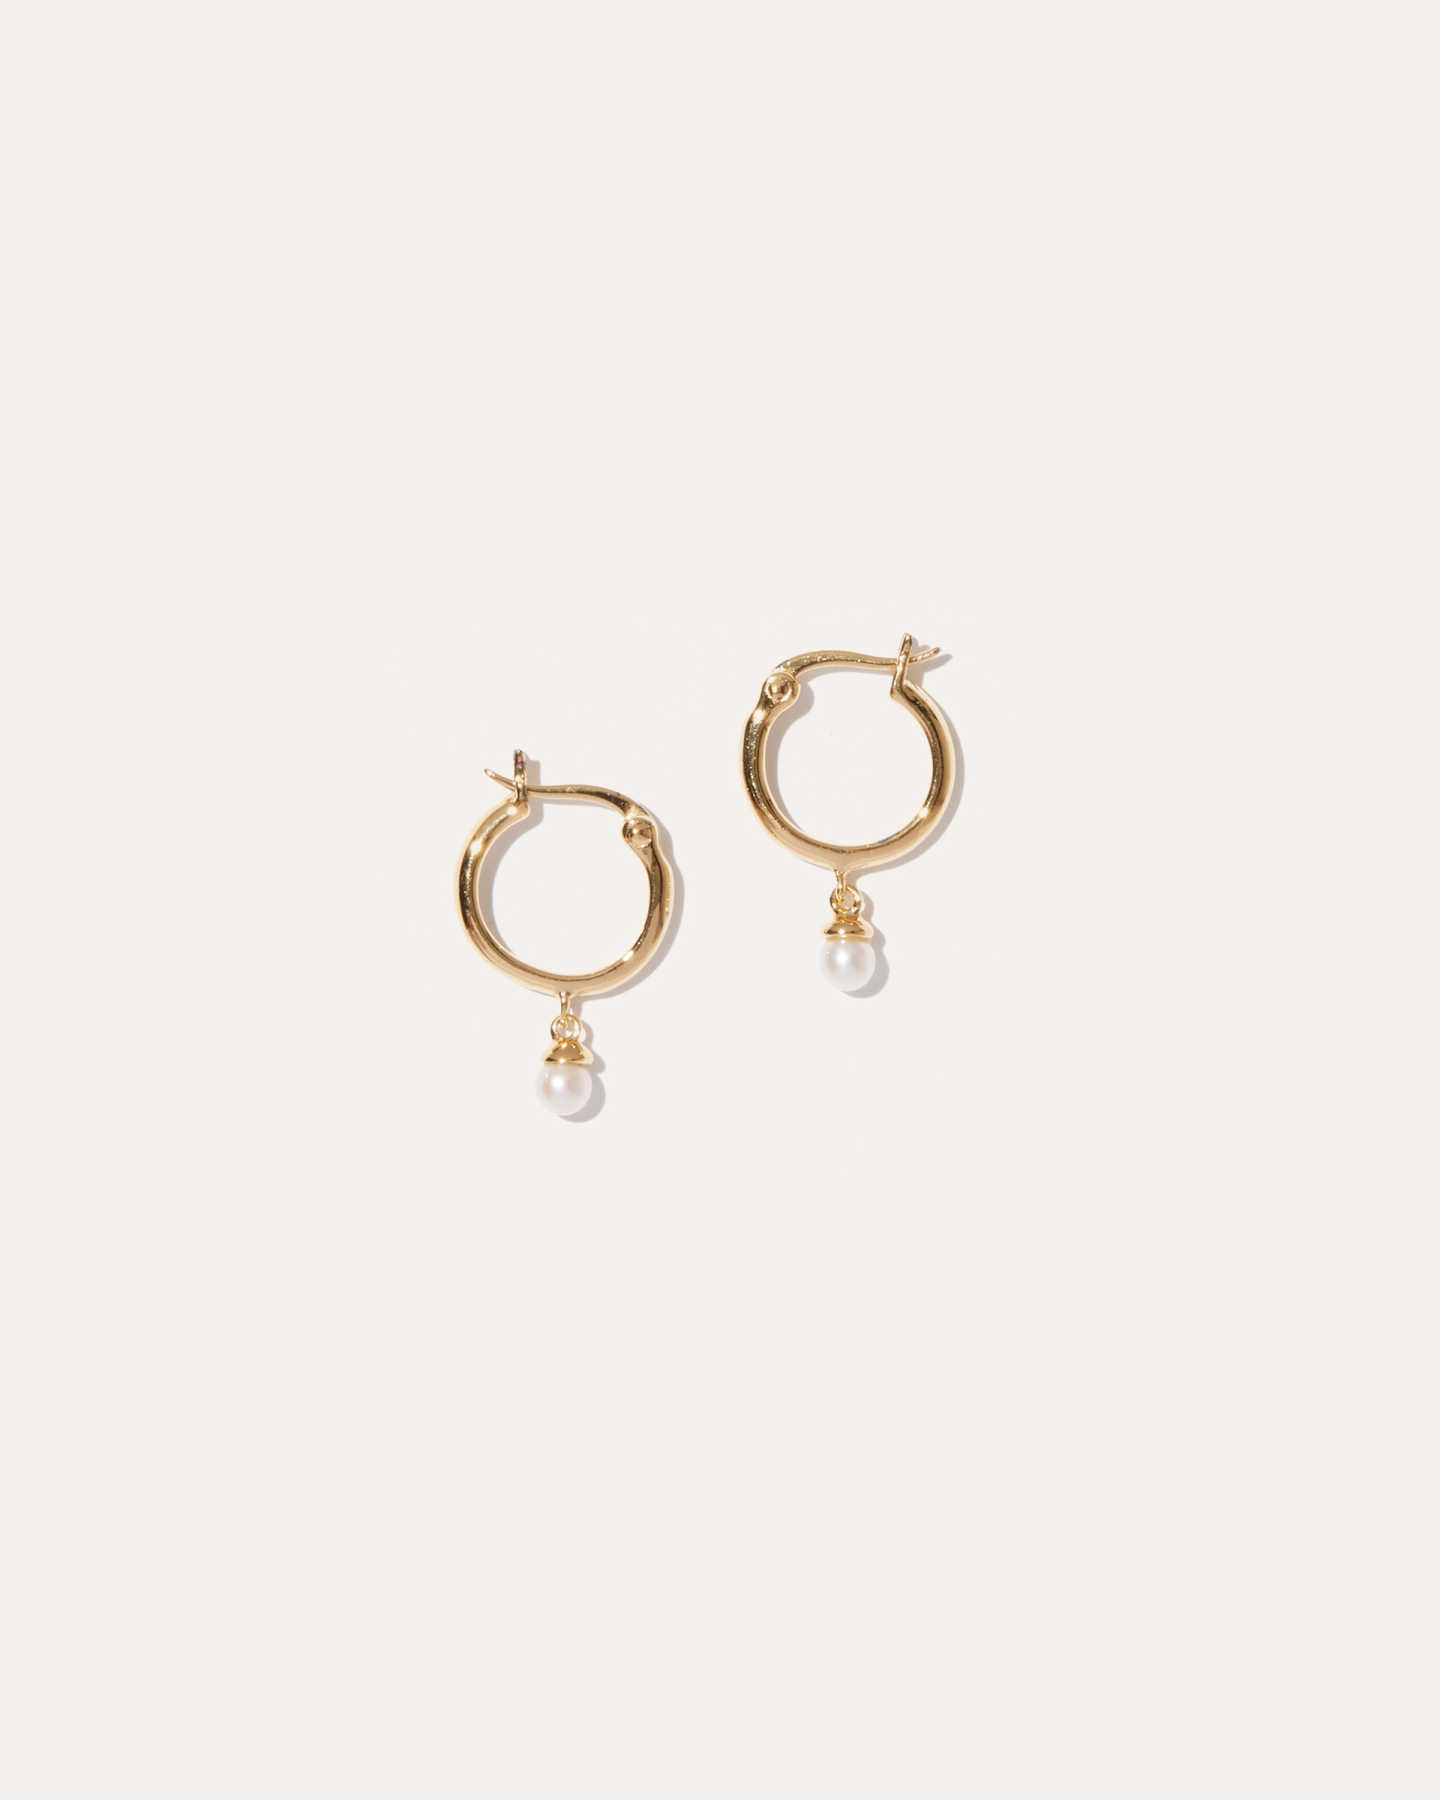 You May Also Like - Small Freshwater Cultured Pearl Hoops - Gold Vermeil